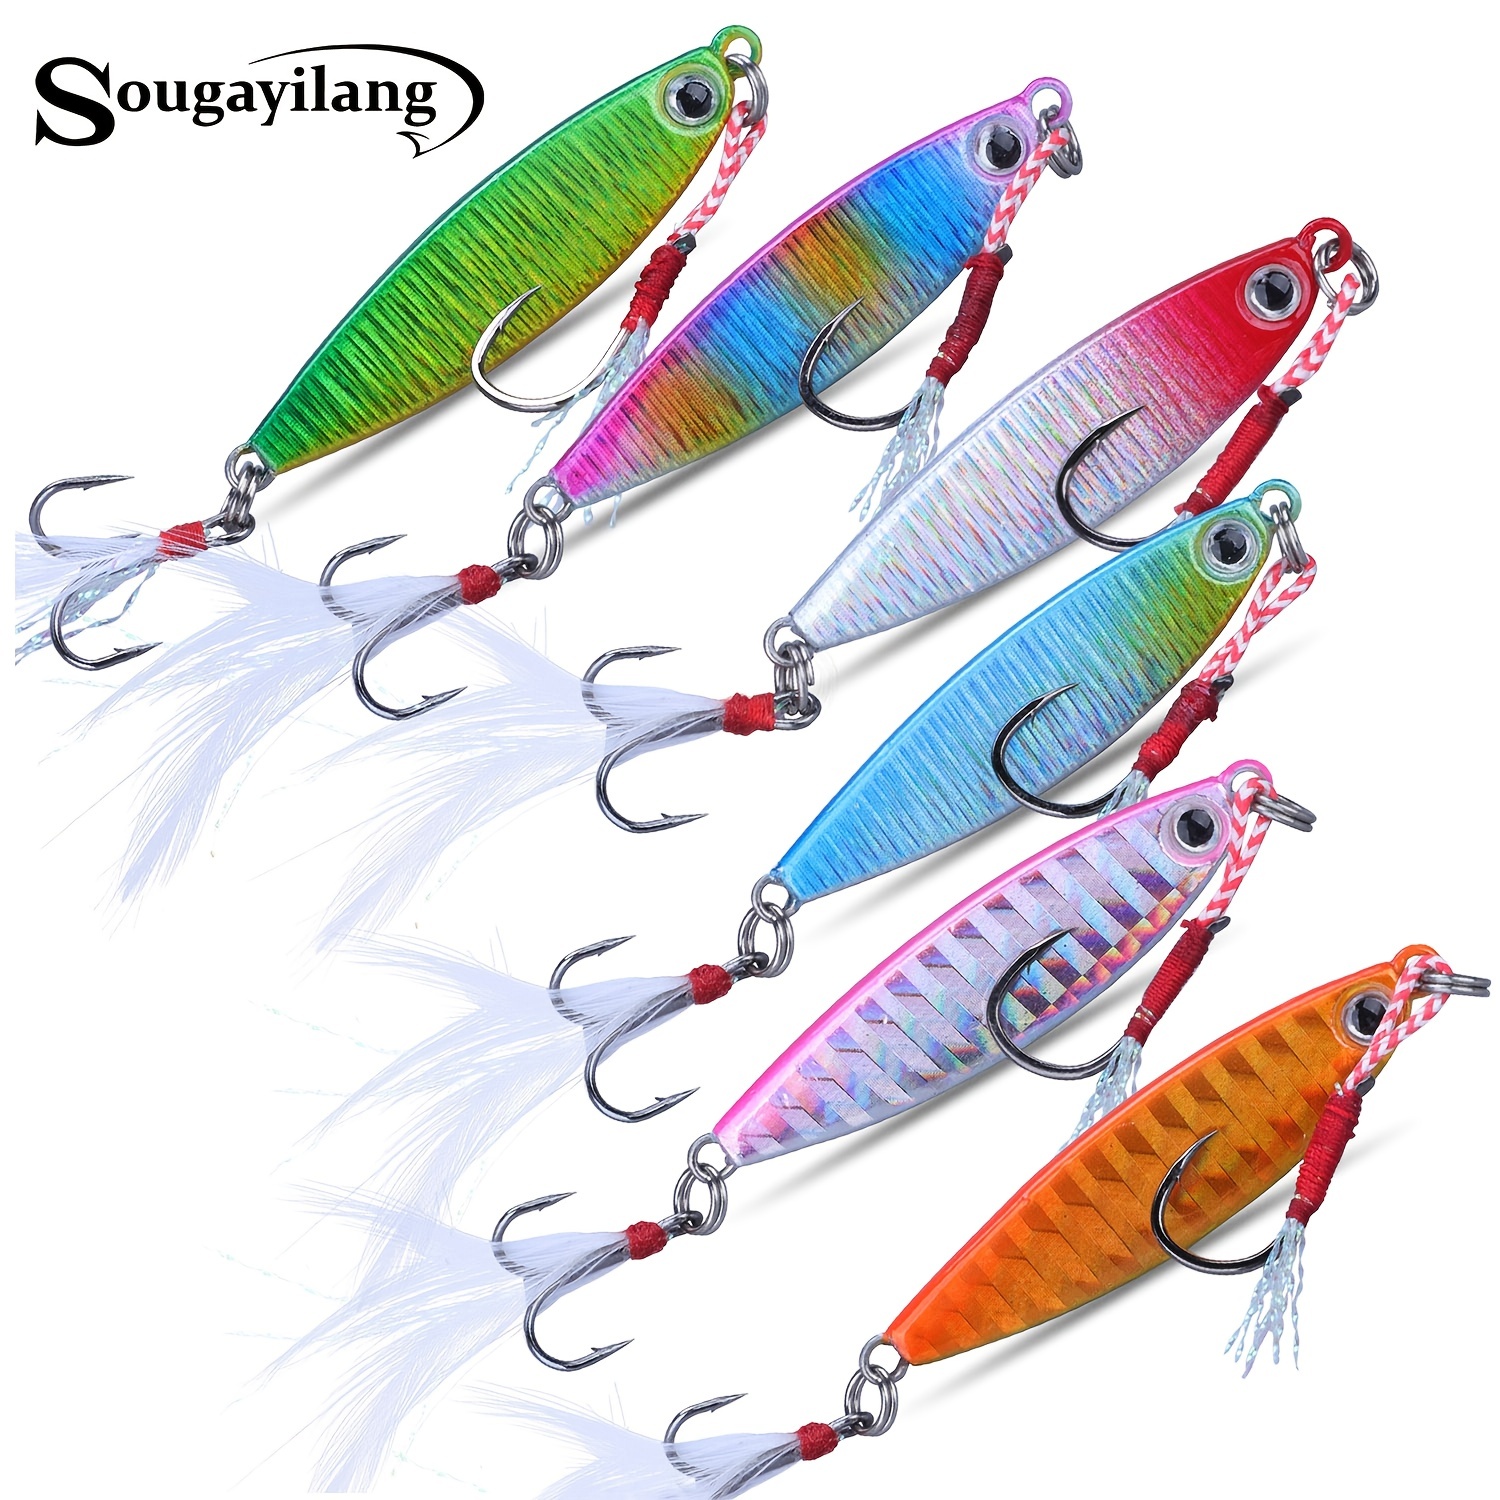 Sougayilang 6pcs Metal Spoon Rooster Tail Fishing Lure With Jigs